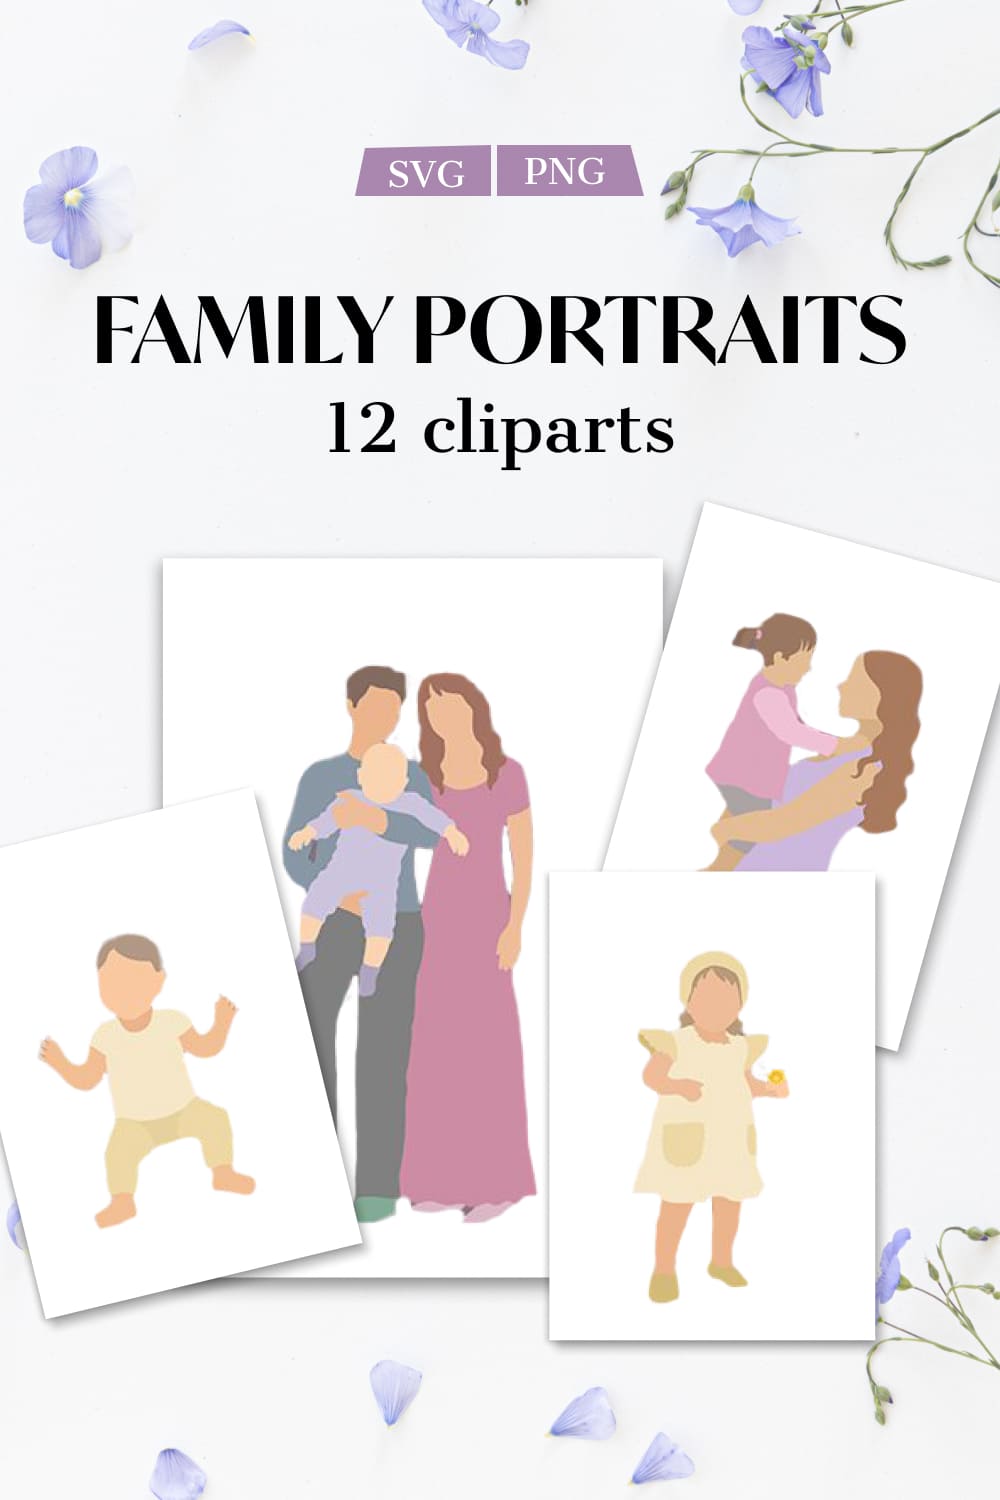 12 cliparts of family portraits.